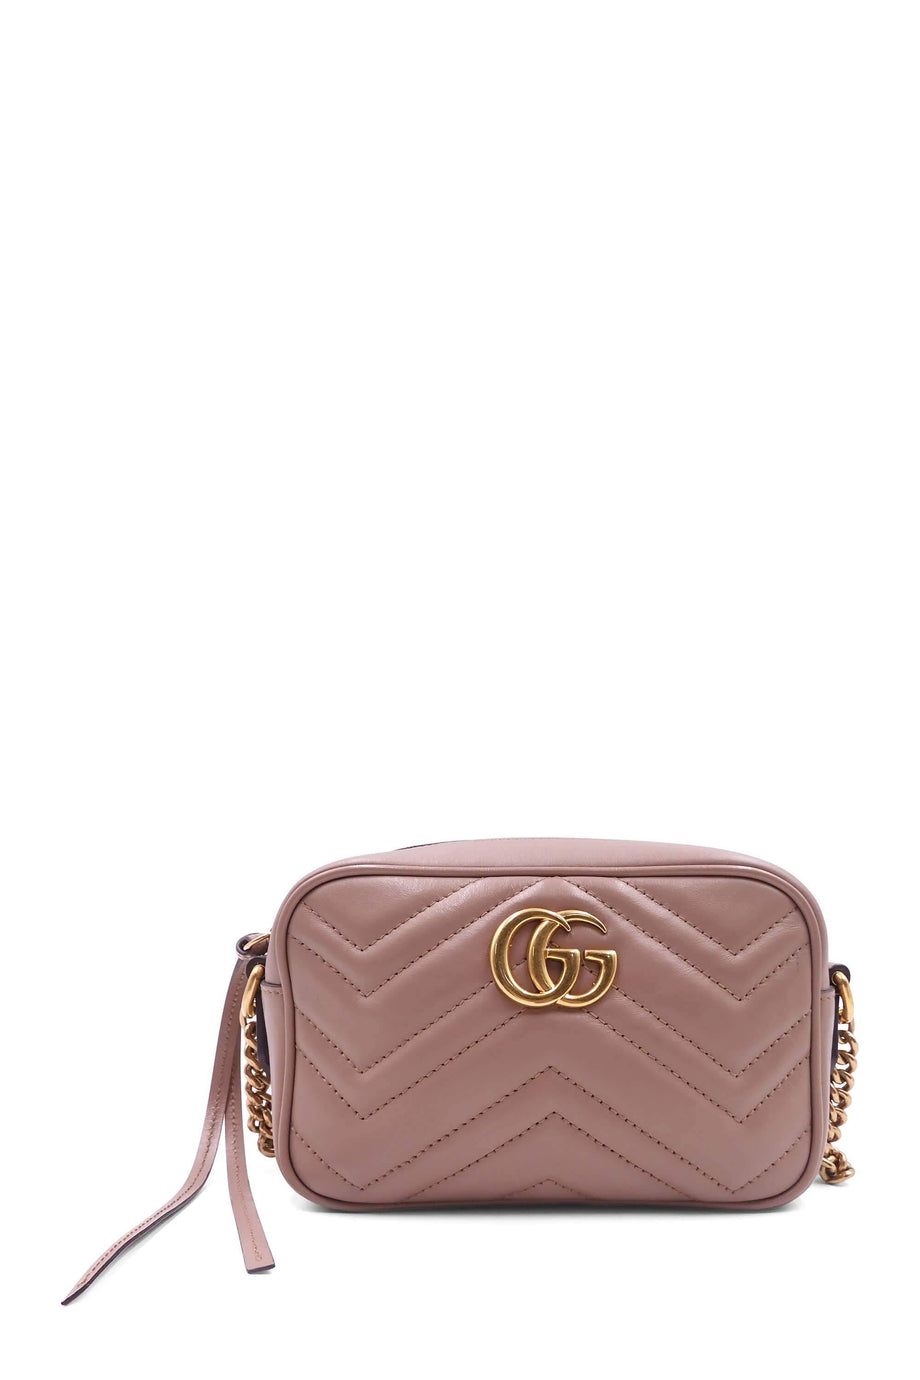 Buy Authentic, Preloved Gucci GG Marmont Matelasse Mini Bag Dusty Pink Bags  from Second Edit by Style Theory